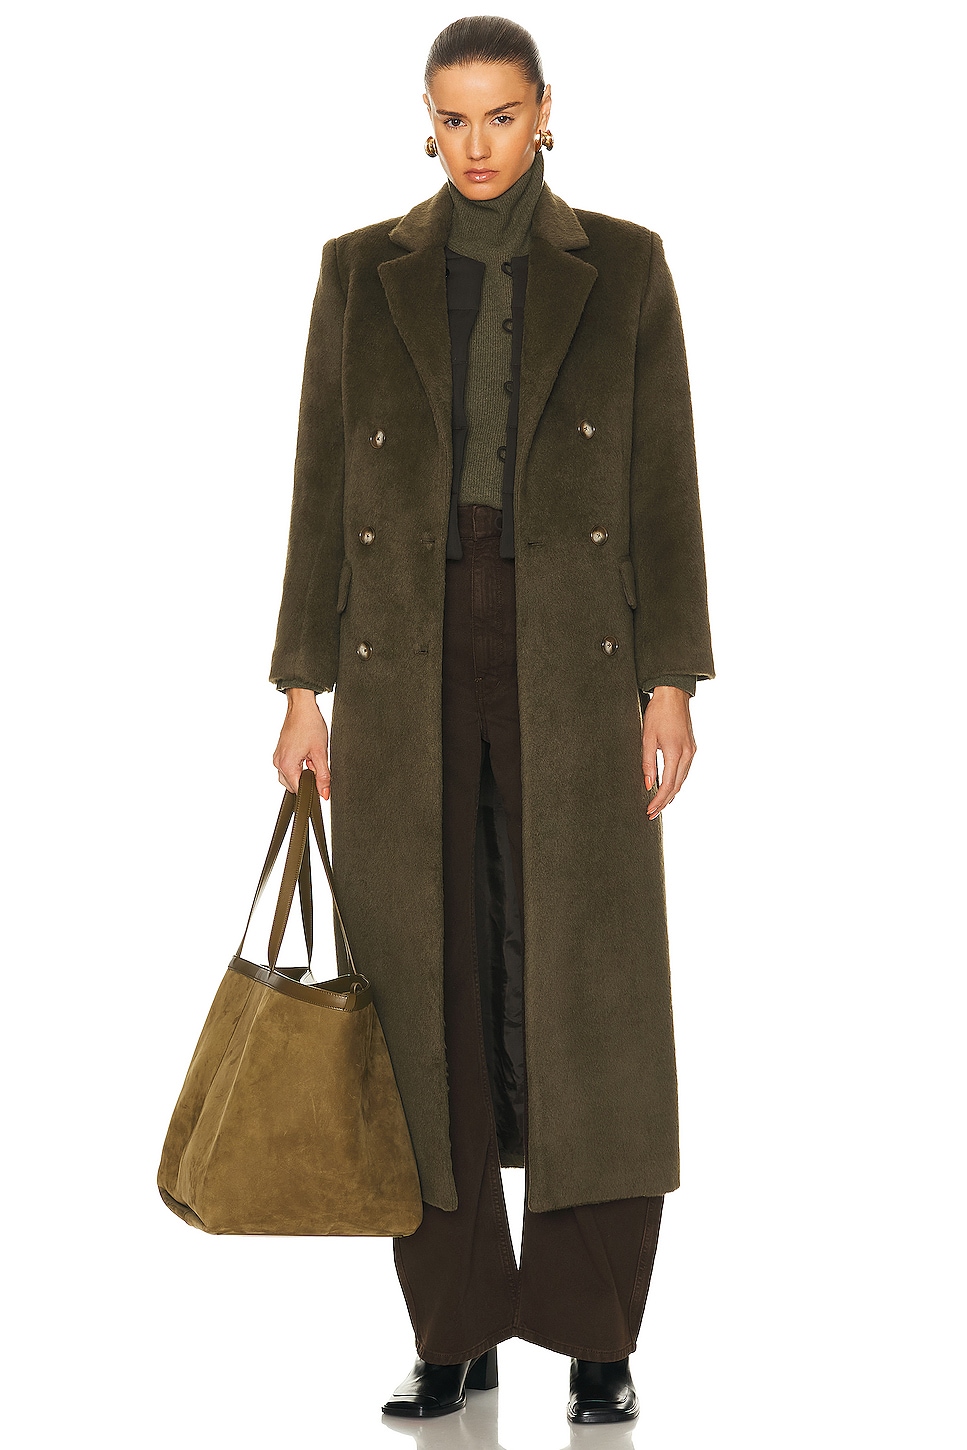 The Arden Coat in Olive